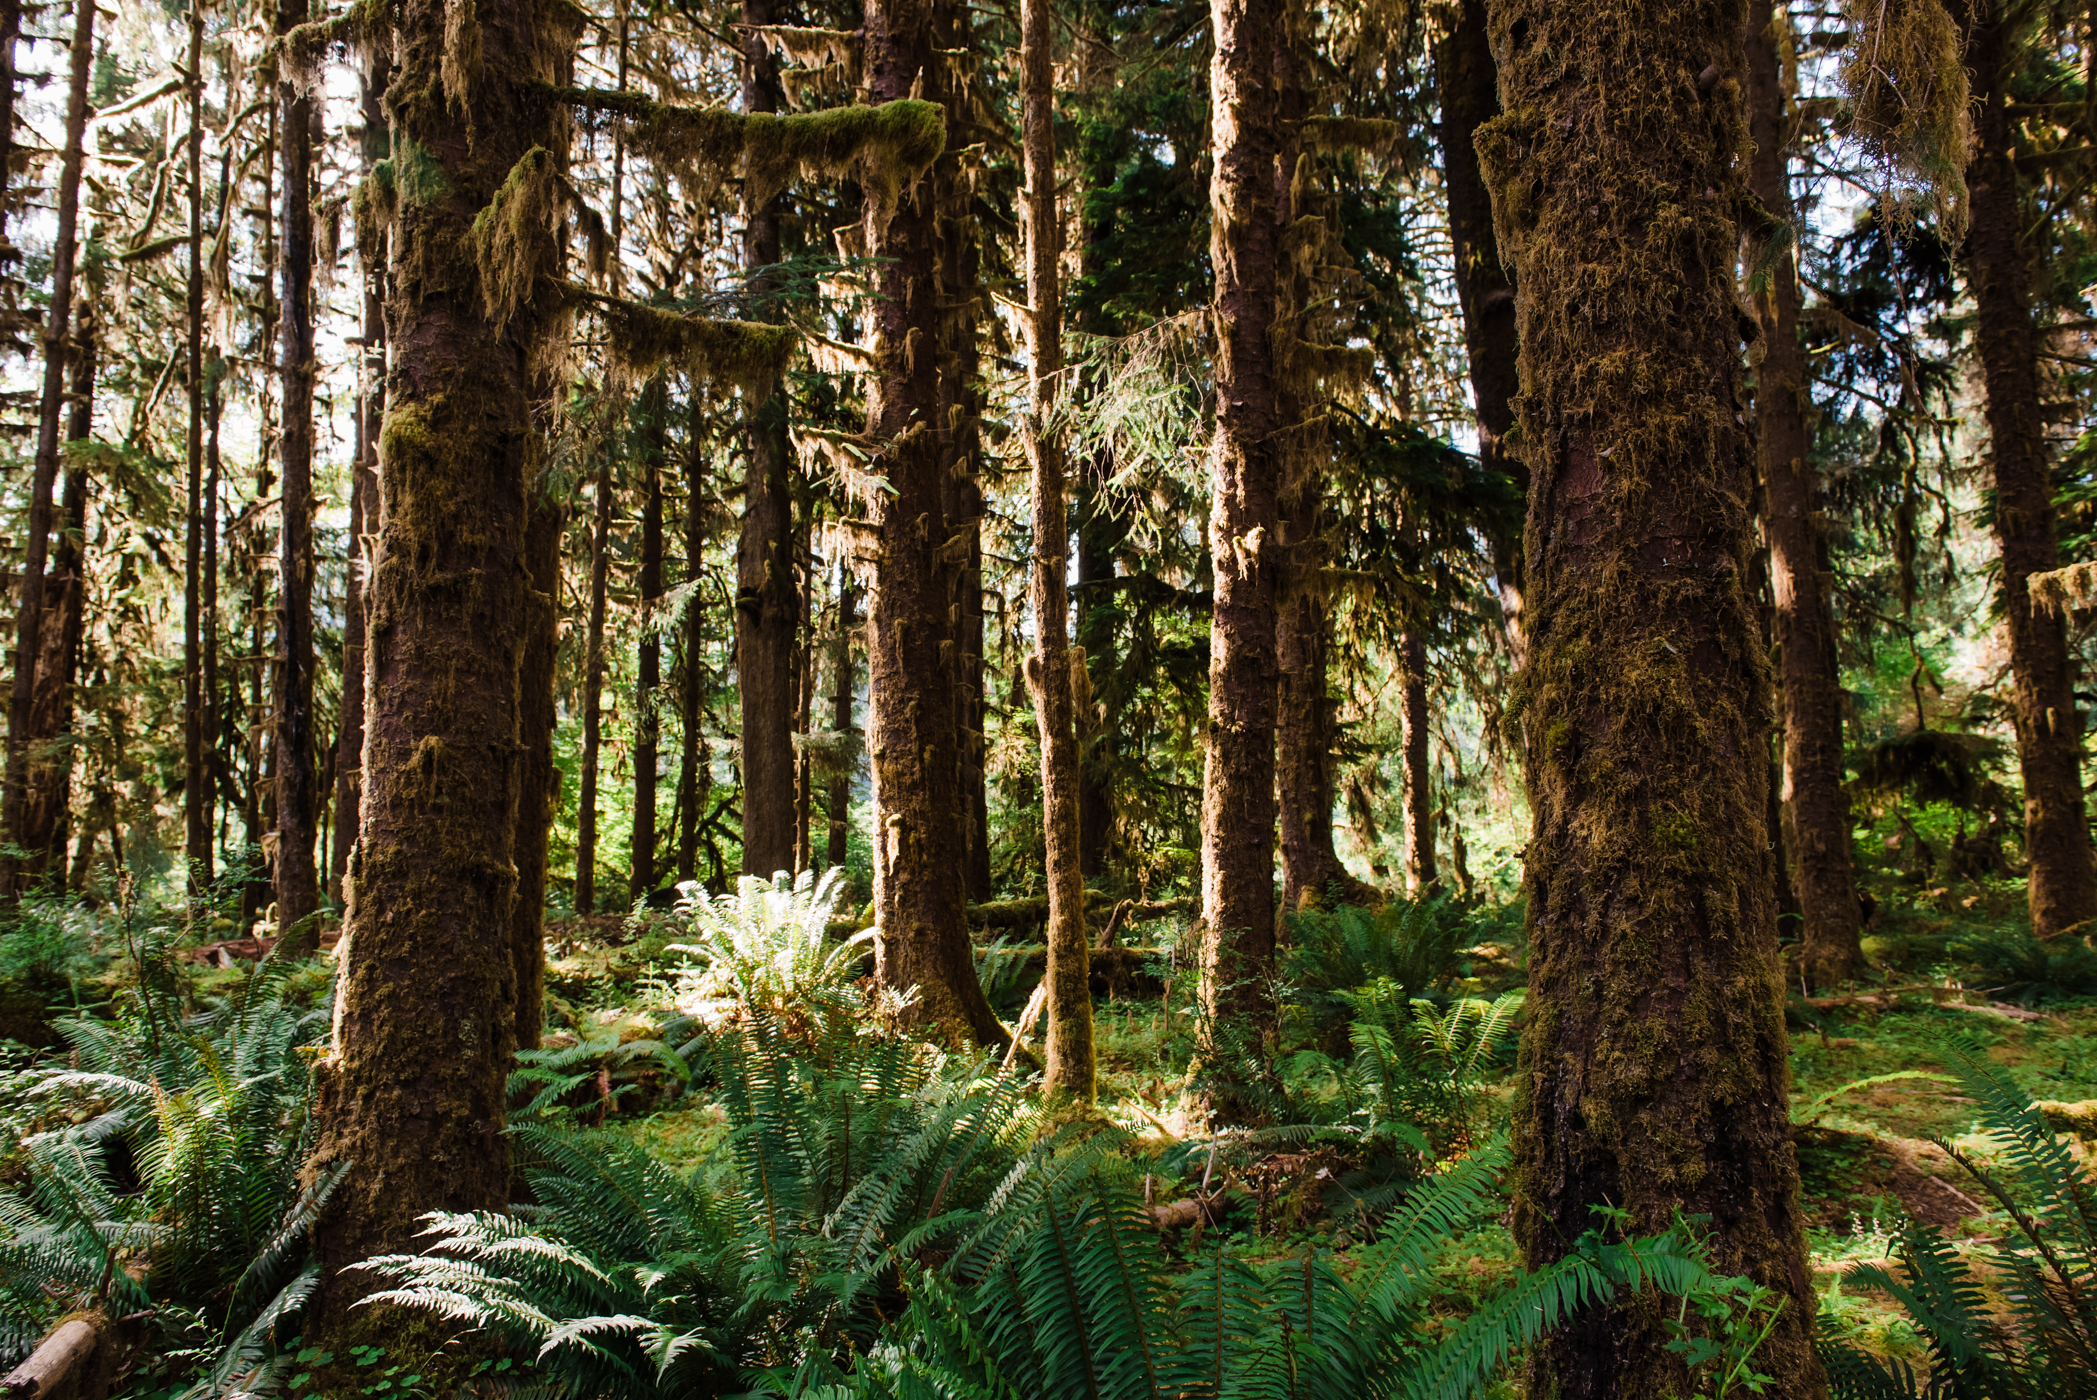 A forest elopement location within Olympic National Park at Hoh Rainforest